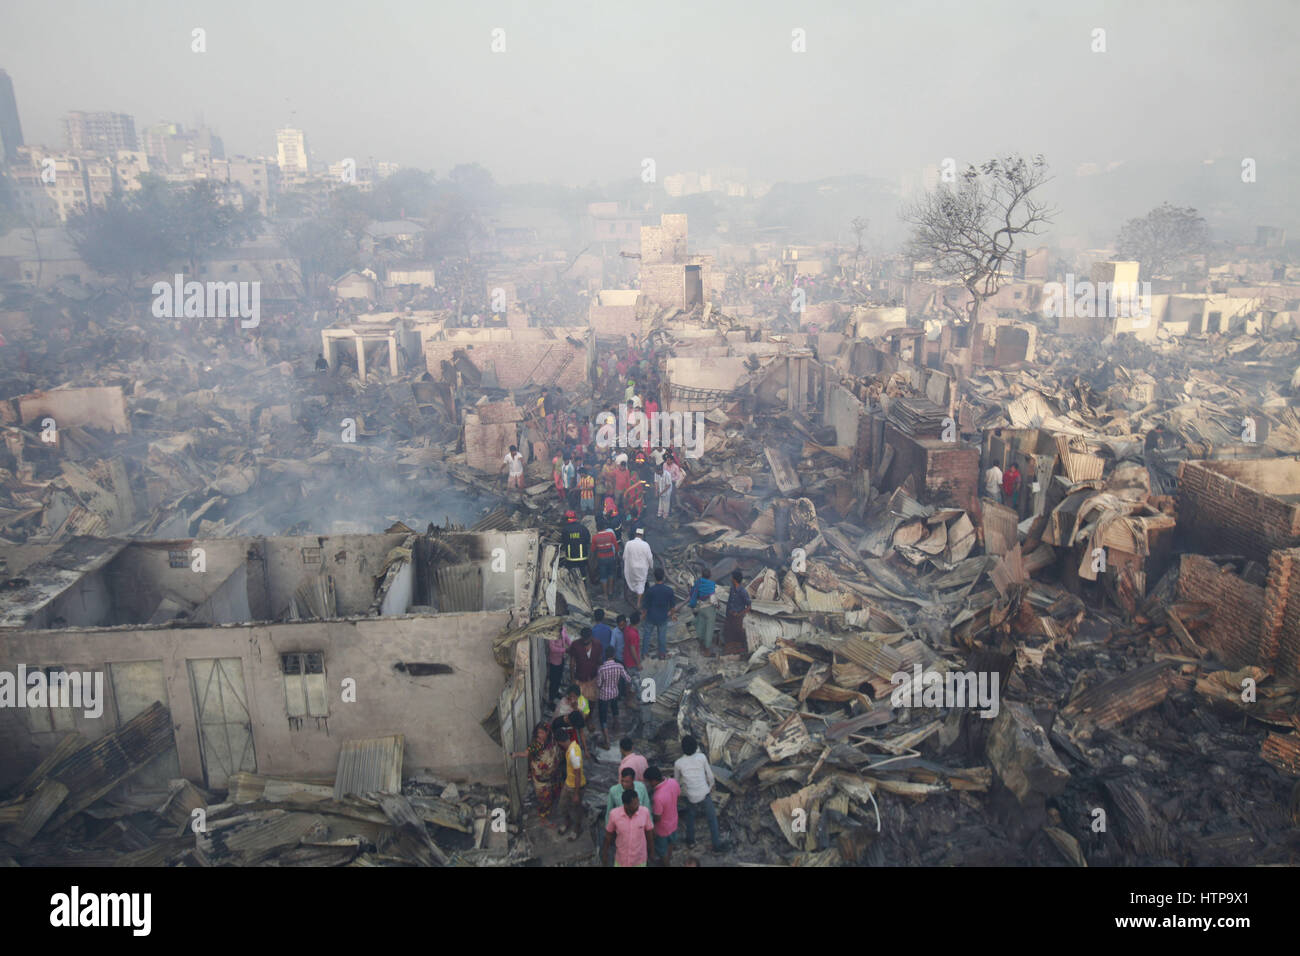 Dhaka, Bangladesh. 16th Mar, 2017. Many shanties at Korail slum razed to the ground by a fire that broke out at the early hours of Thursday, Dhaka, Bangladesh. More than 40,000 people have been affected as fire guts over 500 shanties at Korail slum in Dhaka's Mohakhali area today. Credit: Suvra Kanti Das/ZUMA Wire/Alamy Live News Stock Photo